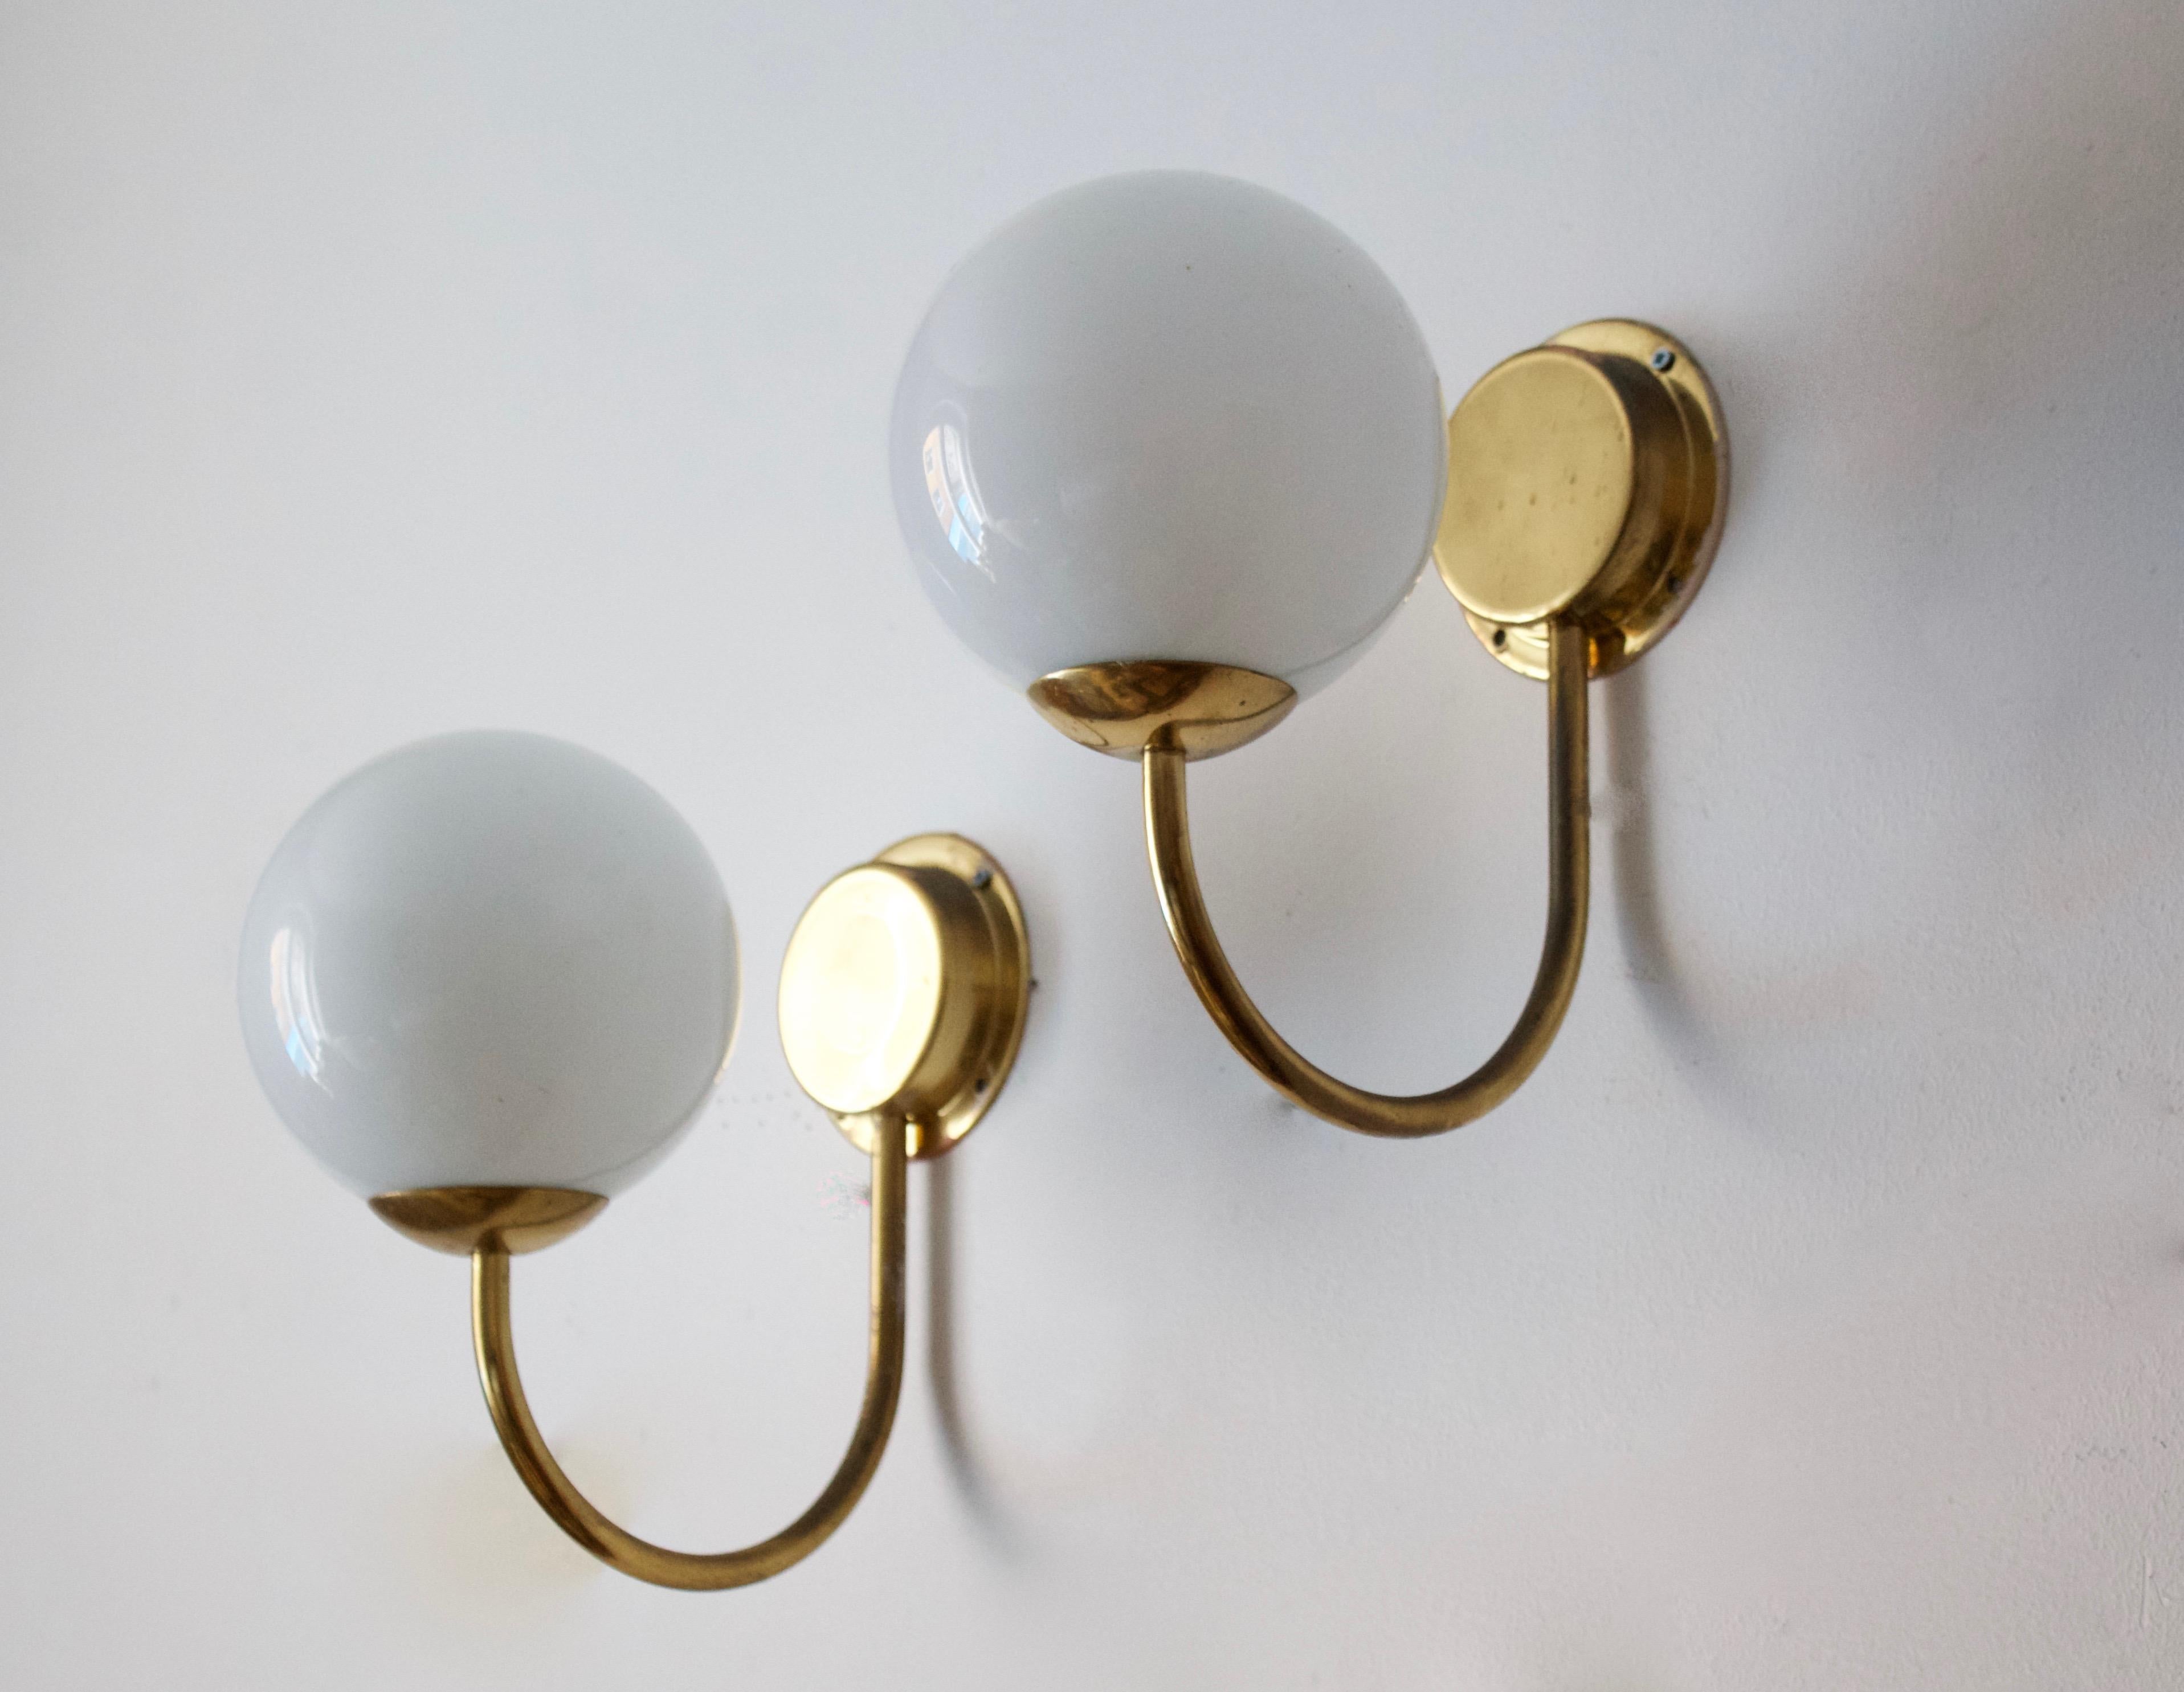 A pair of wall lights / sconces. Designed and produced in Sweden, c. 1950s. In brass, with original milk glass diffusers / lampshades.

Other designers of the period include Hans Bergström, Paavo Tynell, Lisa Johansson-Pape, Alvar Aalto, and Josef